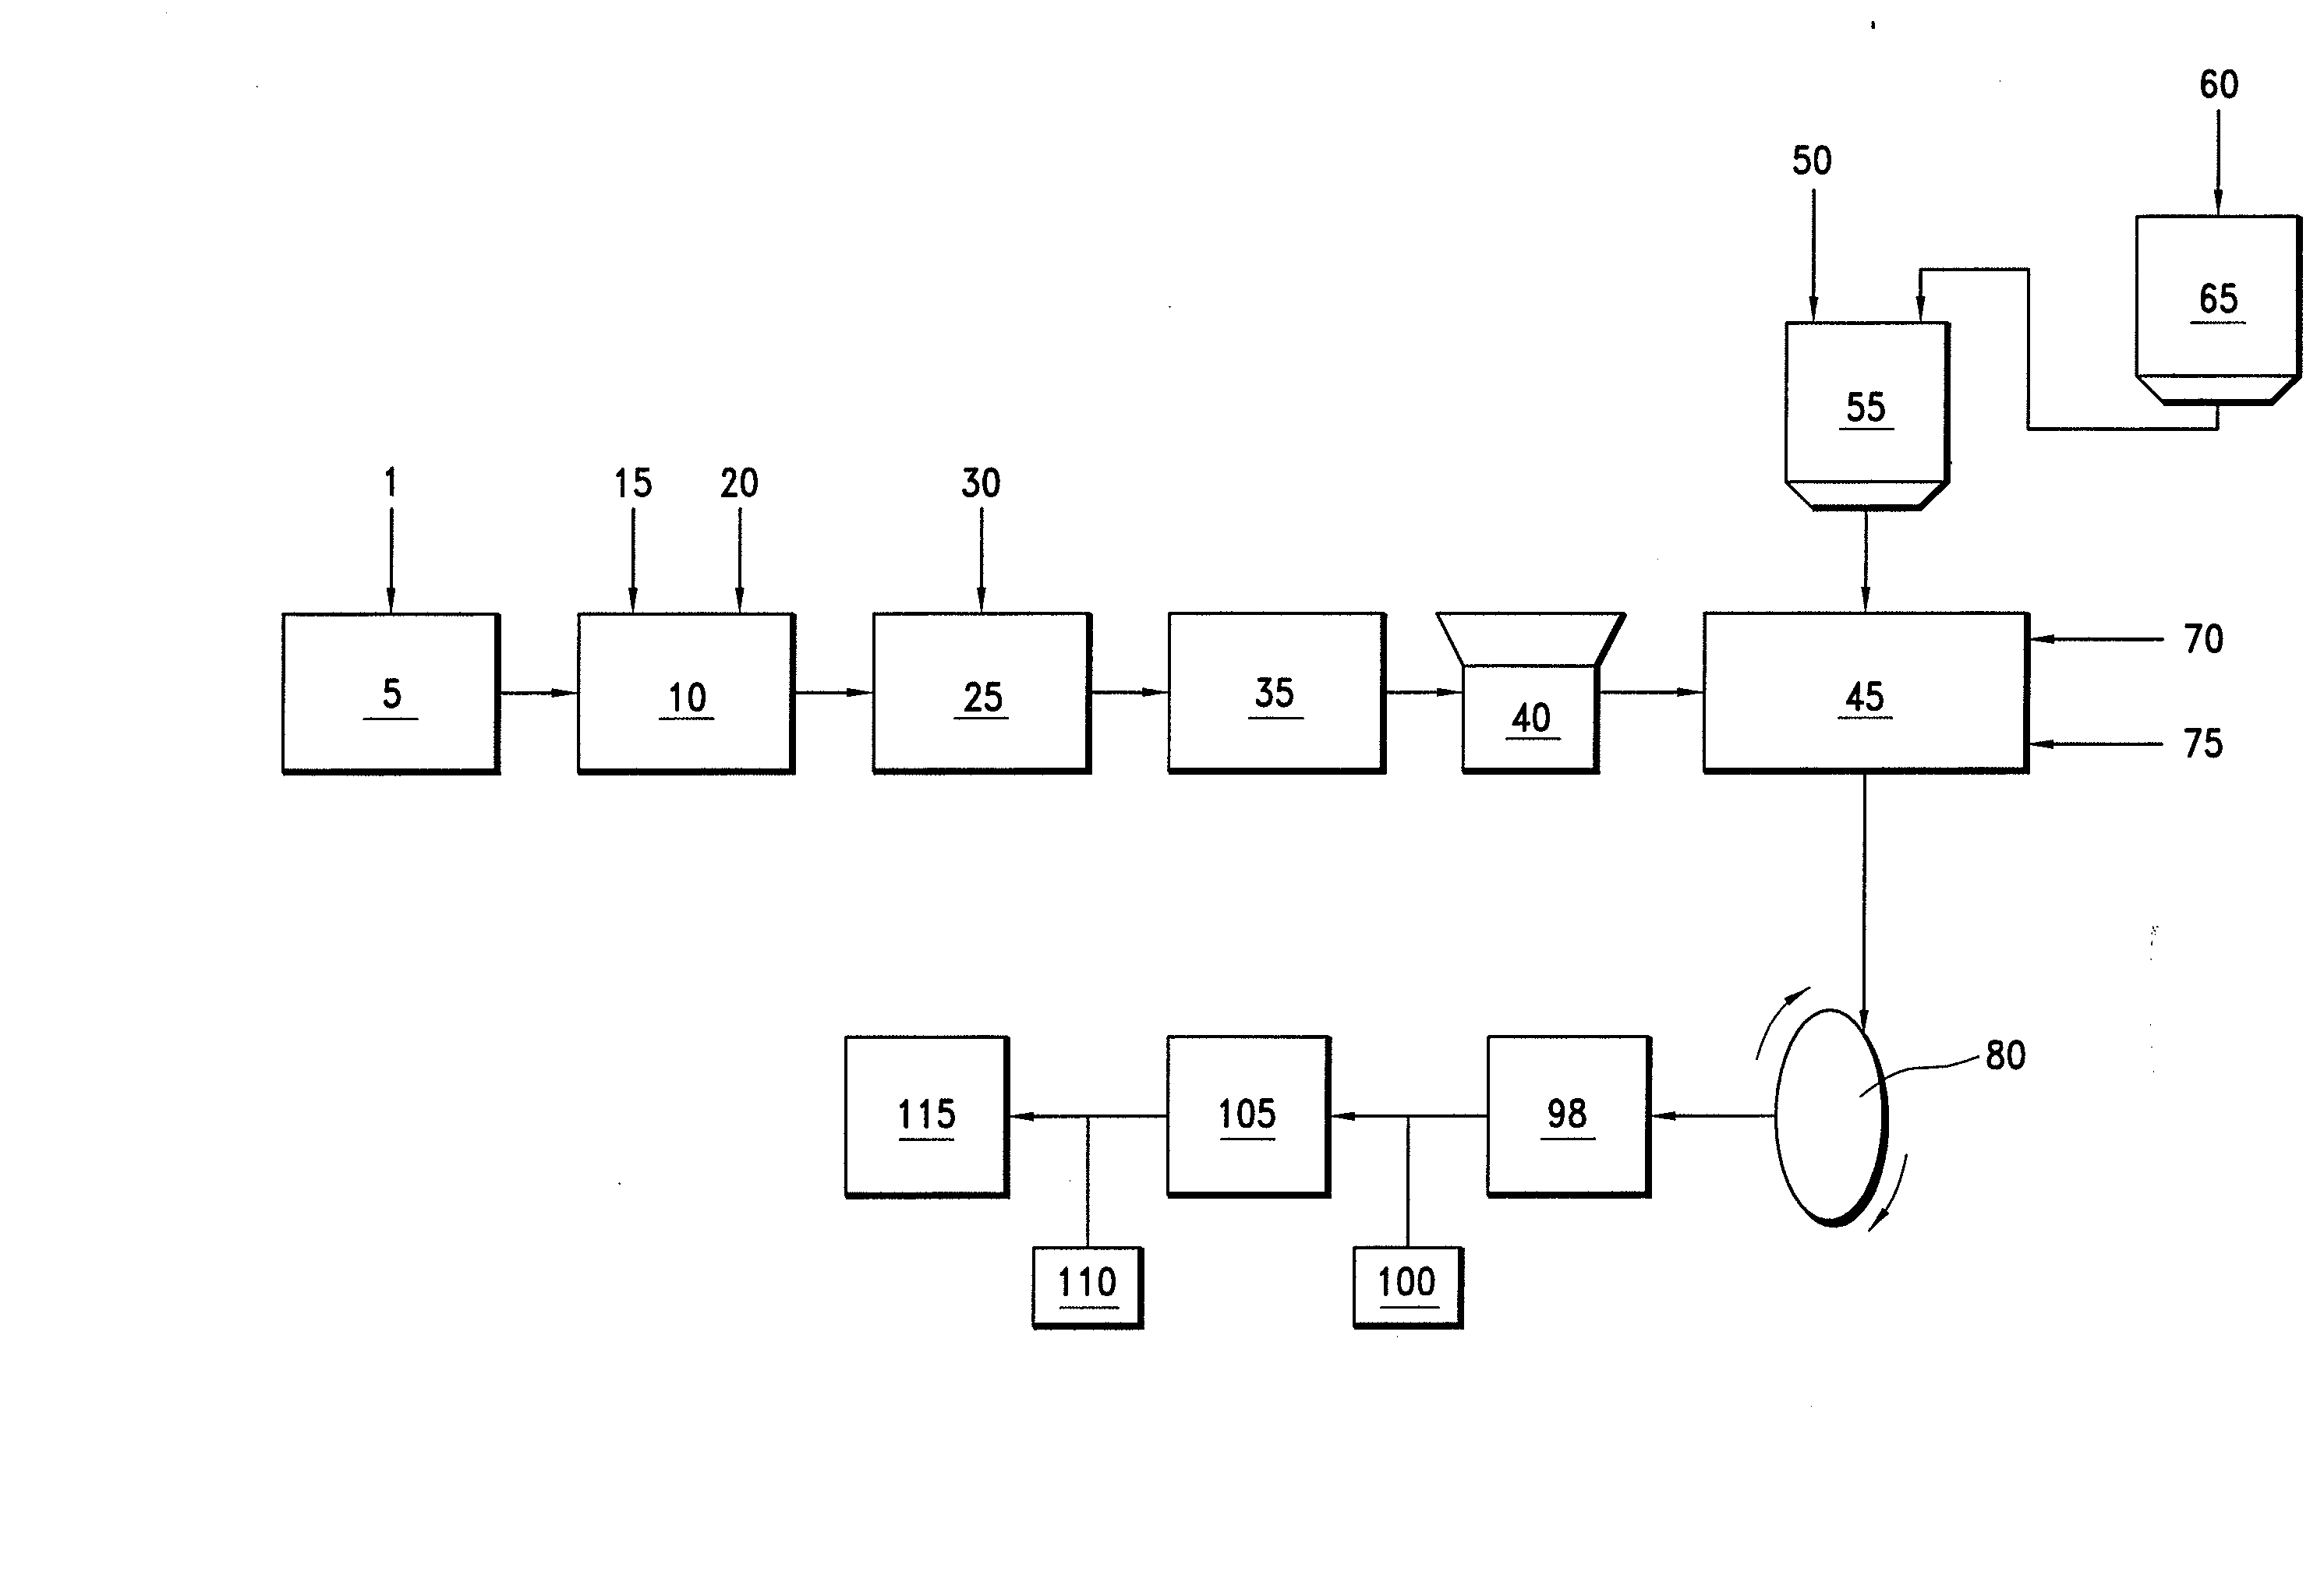 Meat-containing, strip-shaped food product and method of making same